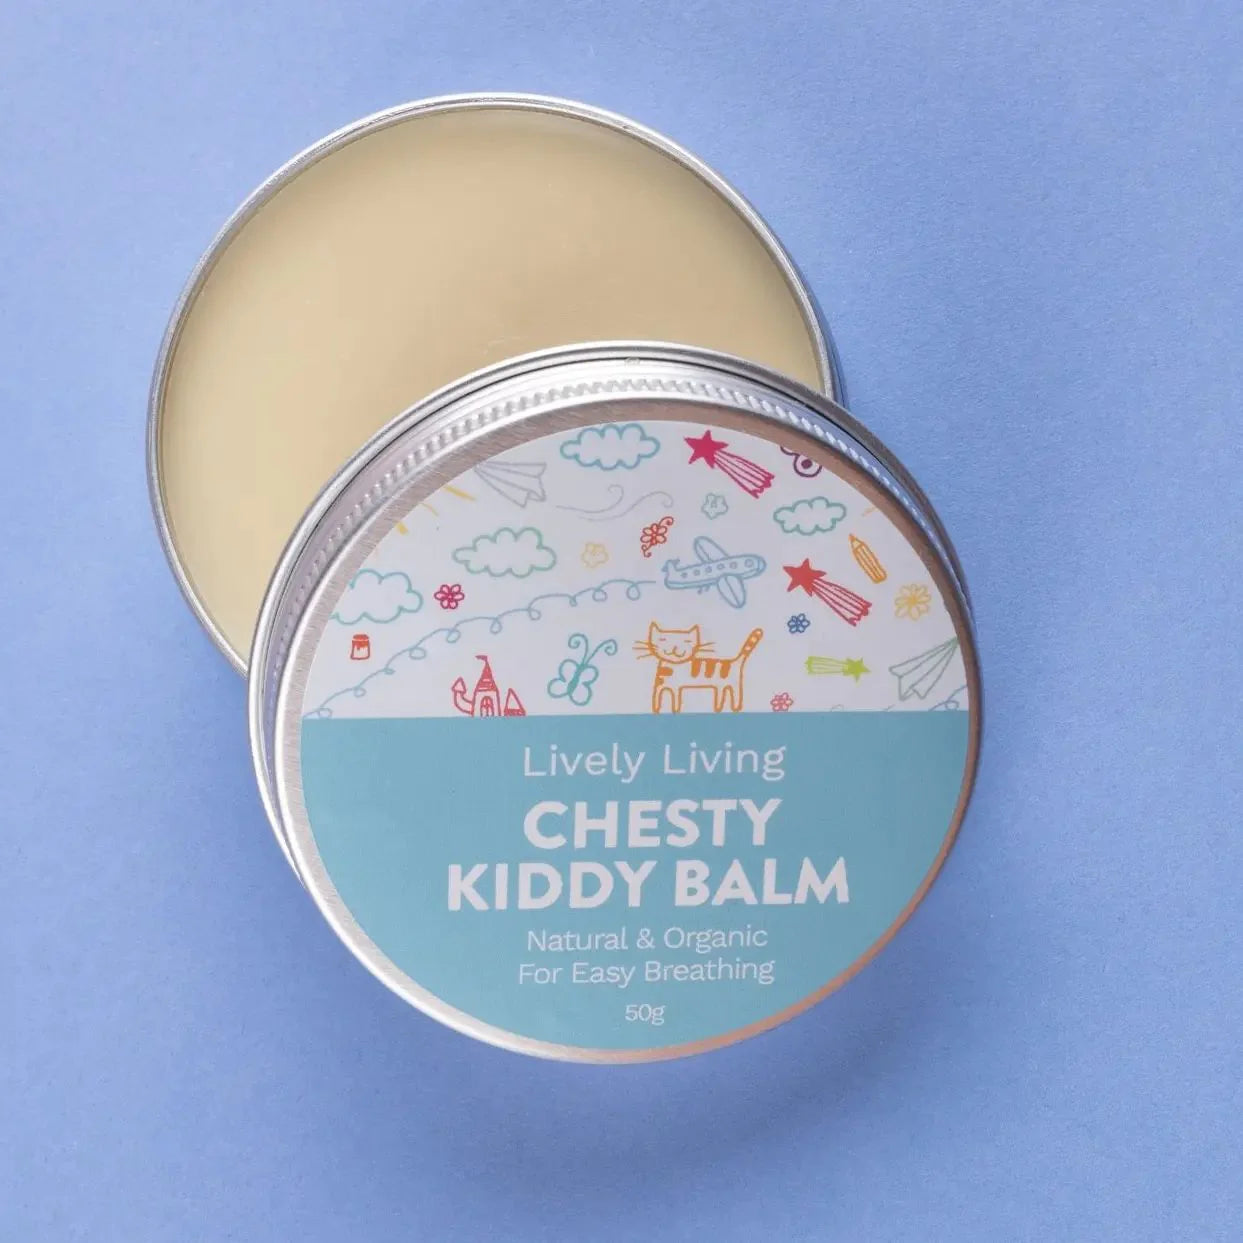 Chesty balm to help relieve congestion and breathing for children